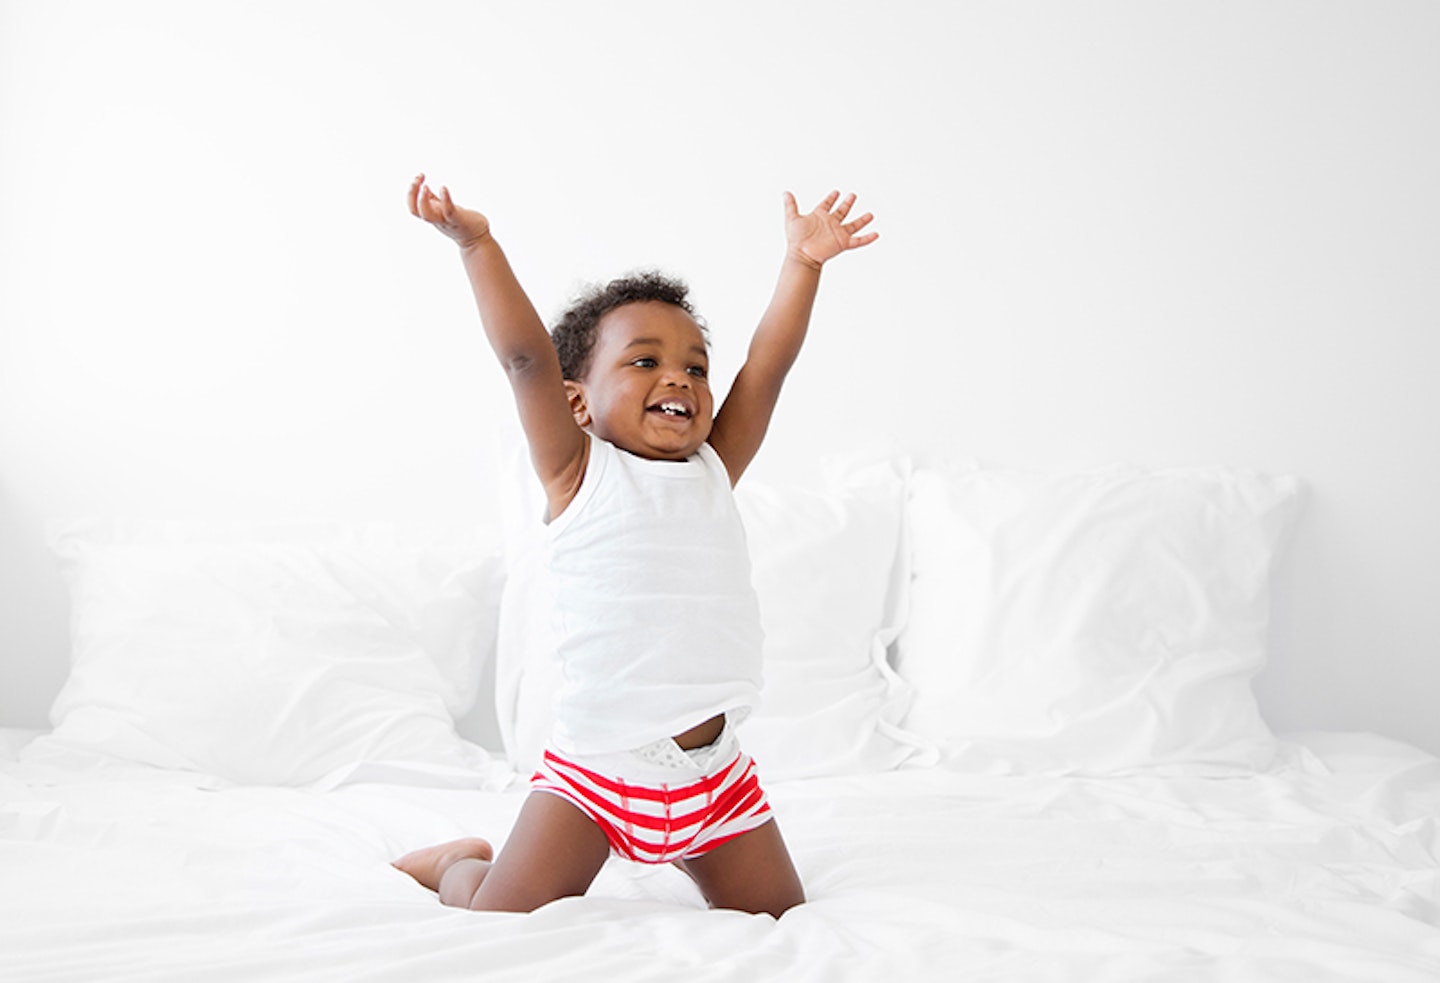 How to Handle Night-Time Potty Training